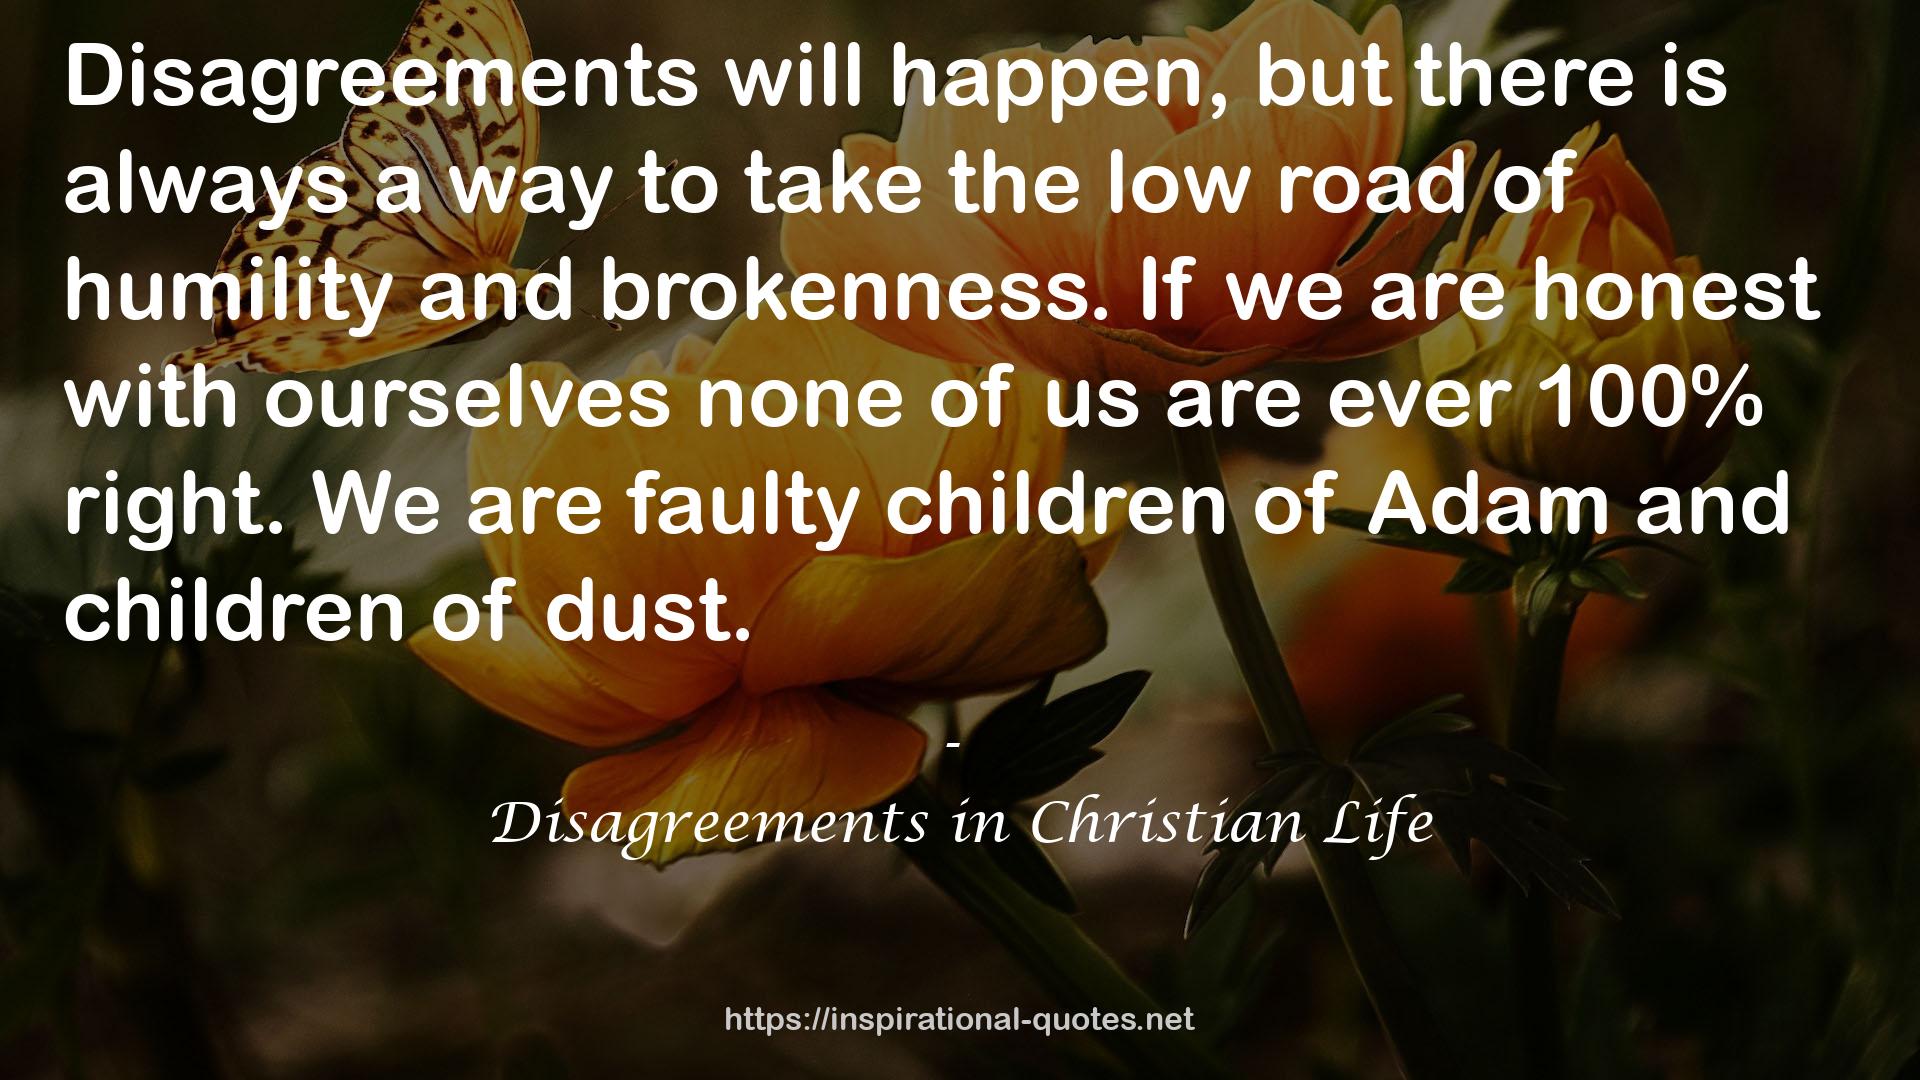 Disagreements in Christian Life QUOTES